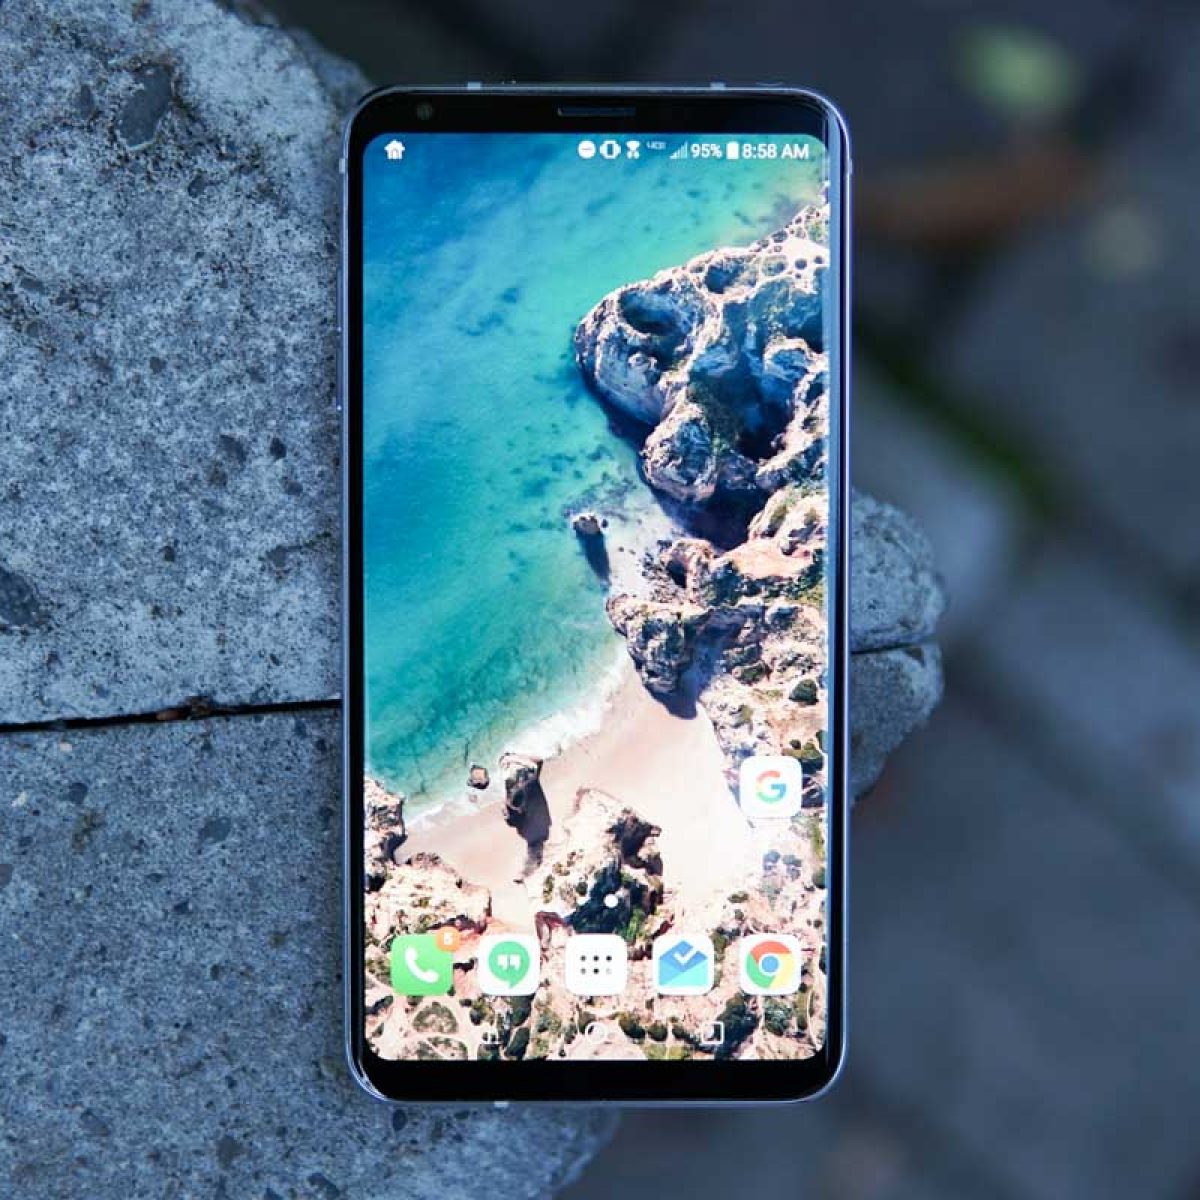 Download: Pixel 2's Live Wallpapers on Your Device